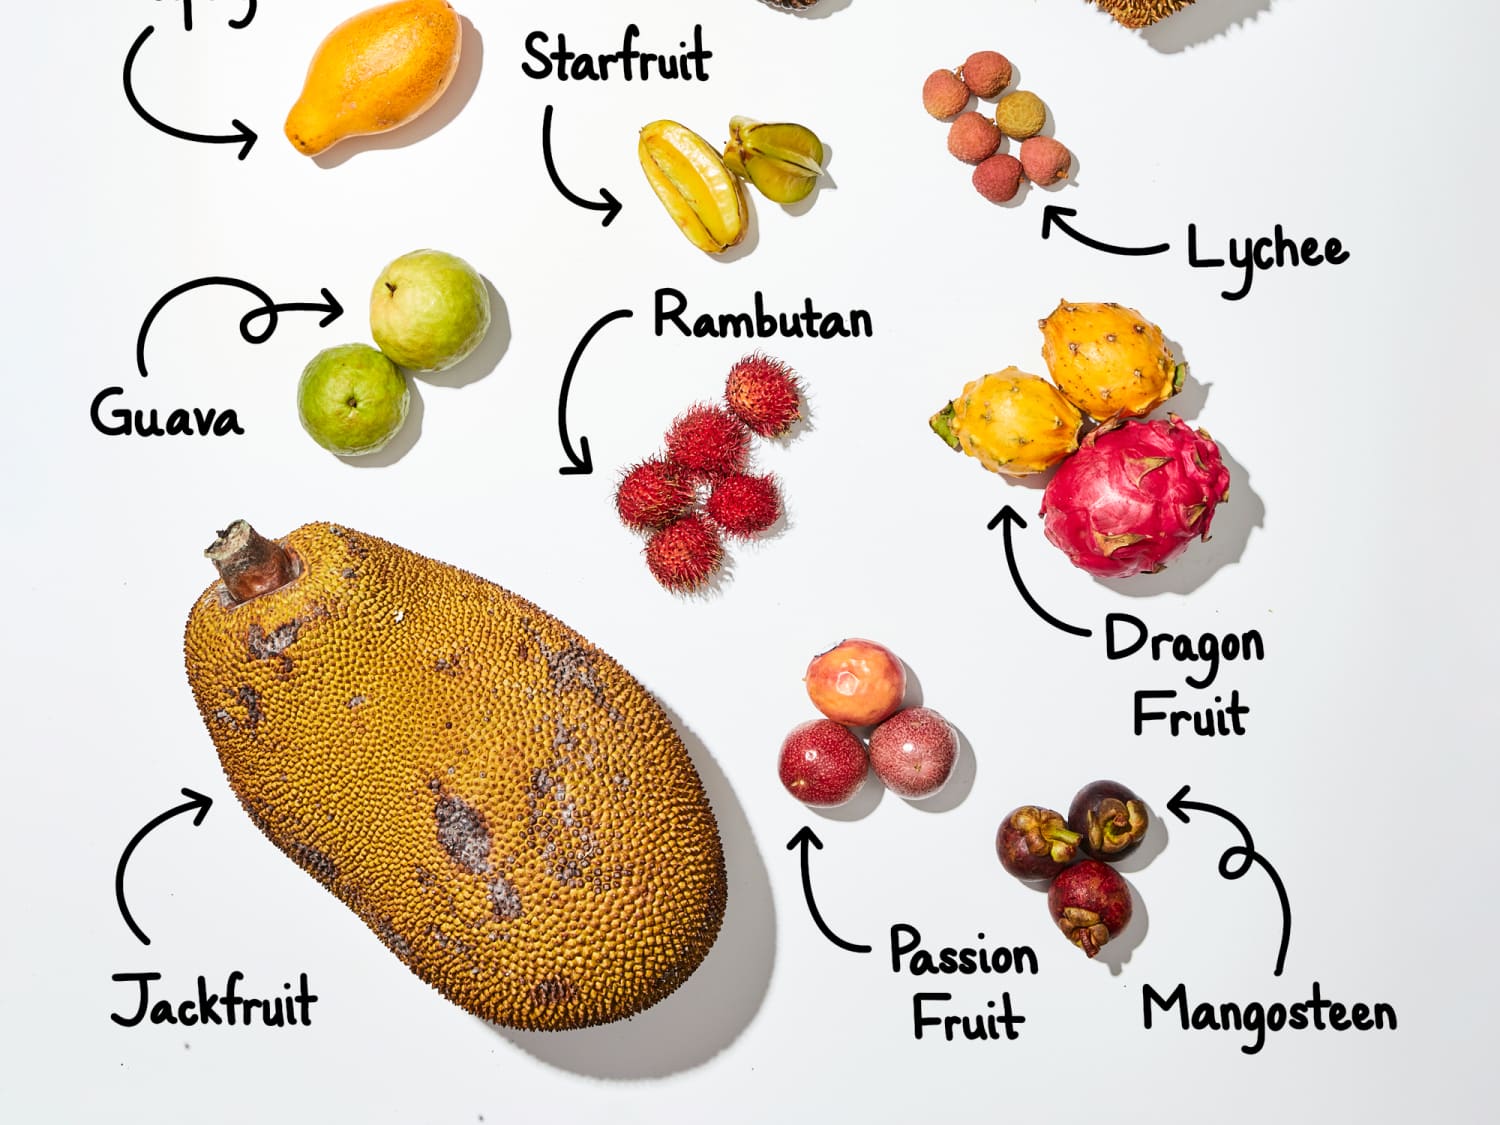 The Best Ways To Eat Lilikoi, The Tangy Fruit You've Never Heard Of